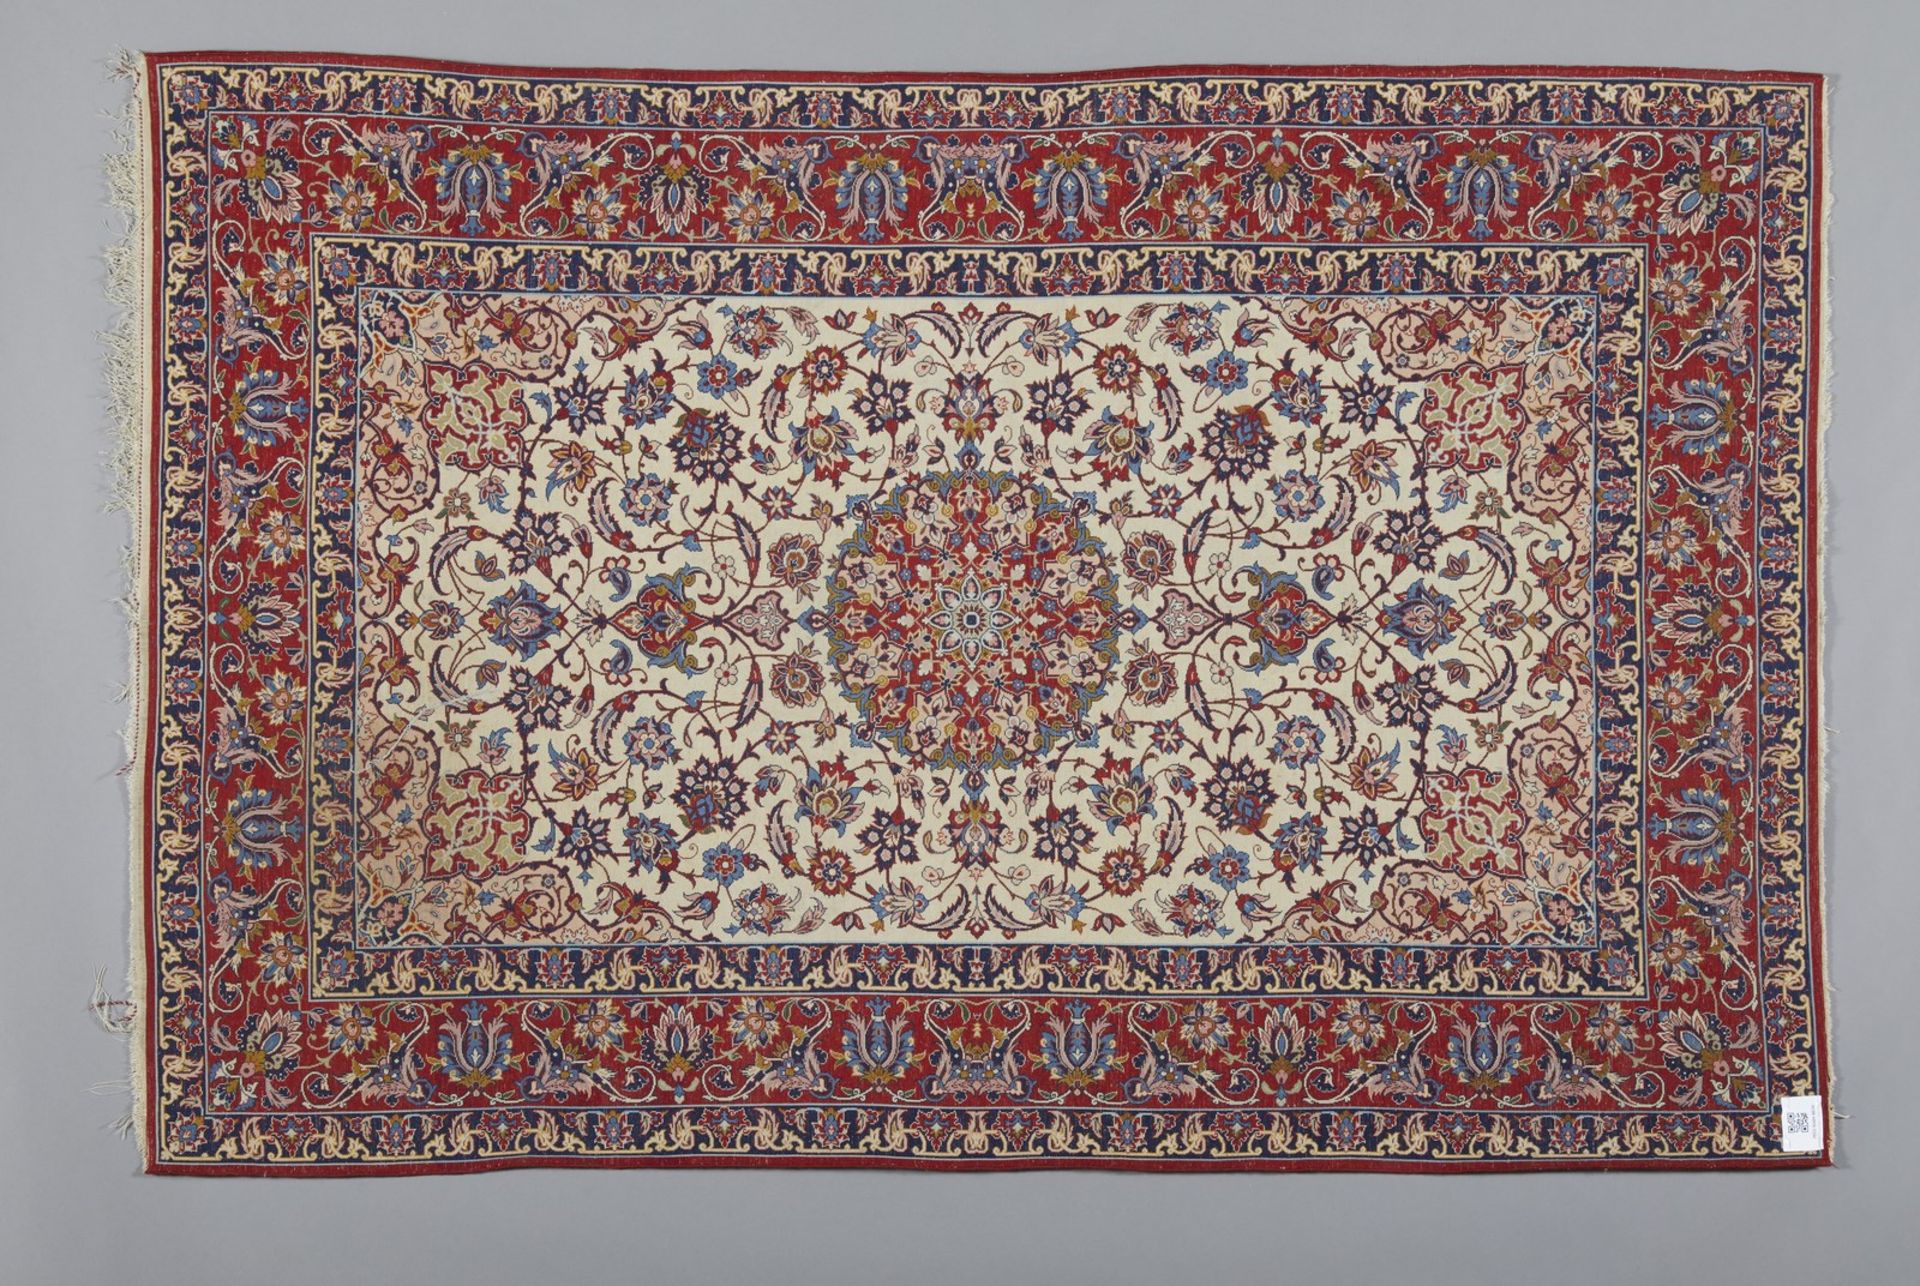 An Isfahan rug Persia, first half 20th century Cm 106,00 x 160,00 - Image 2 of 2